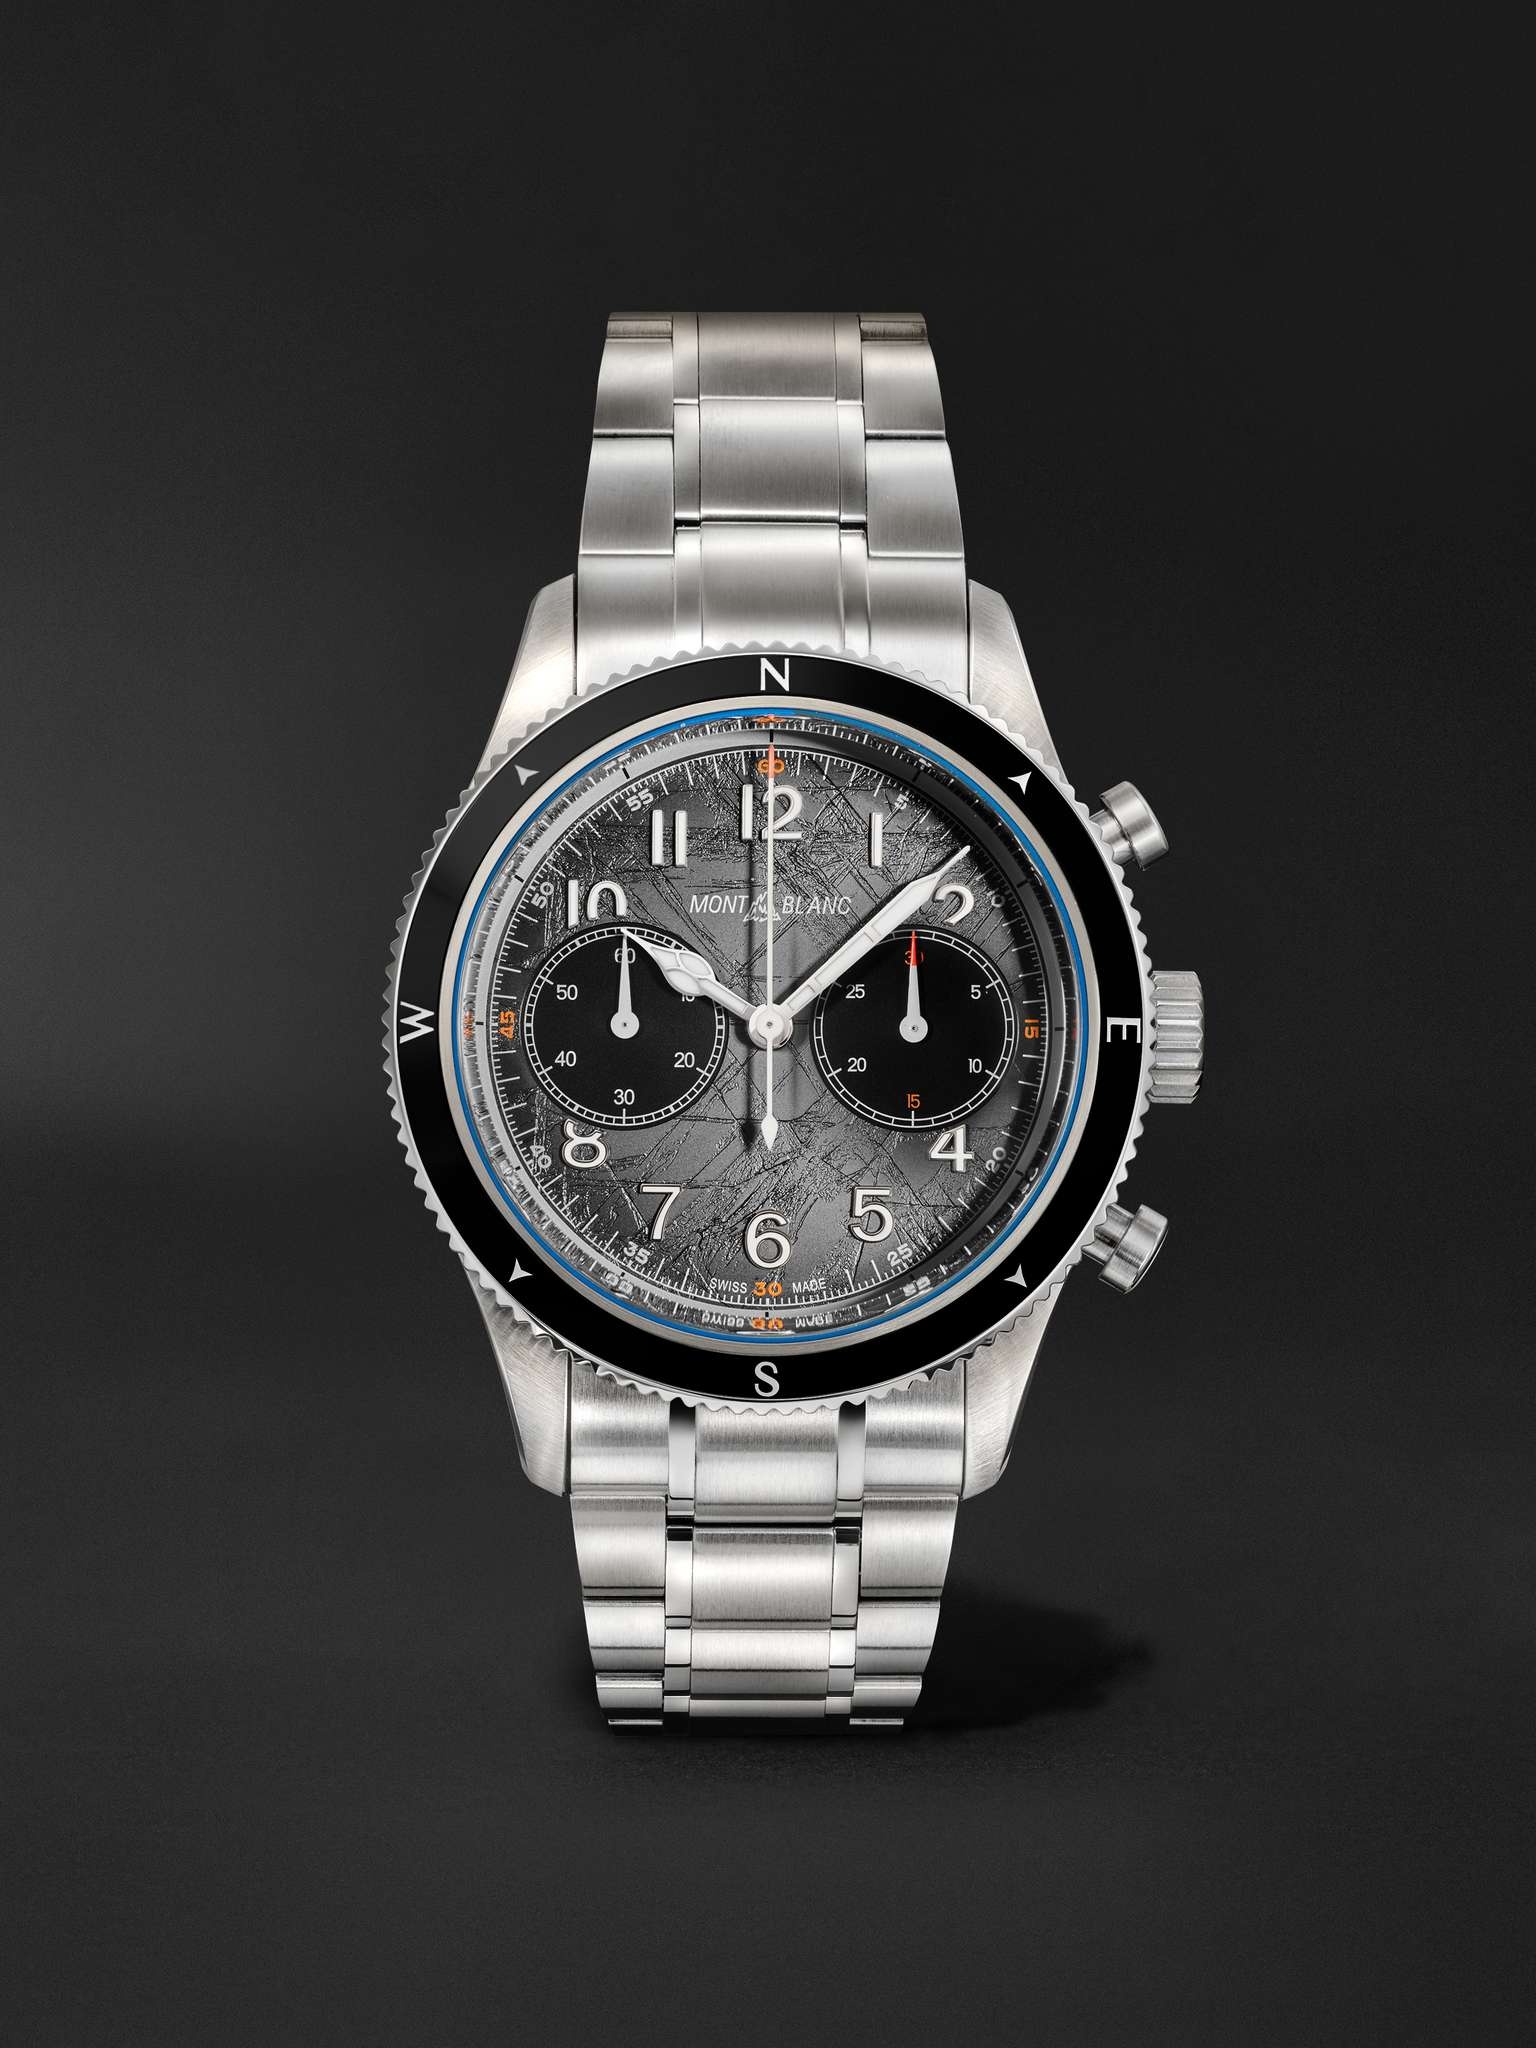 1858 0 Oxygen The 8000 Automatic Chronograph 42mm Stainless Steel Watch, Ref. No. 130983 - 1